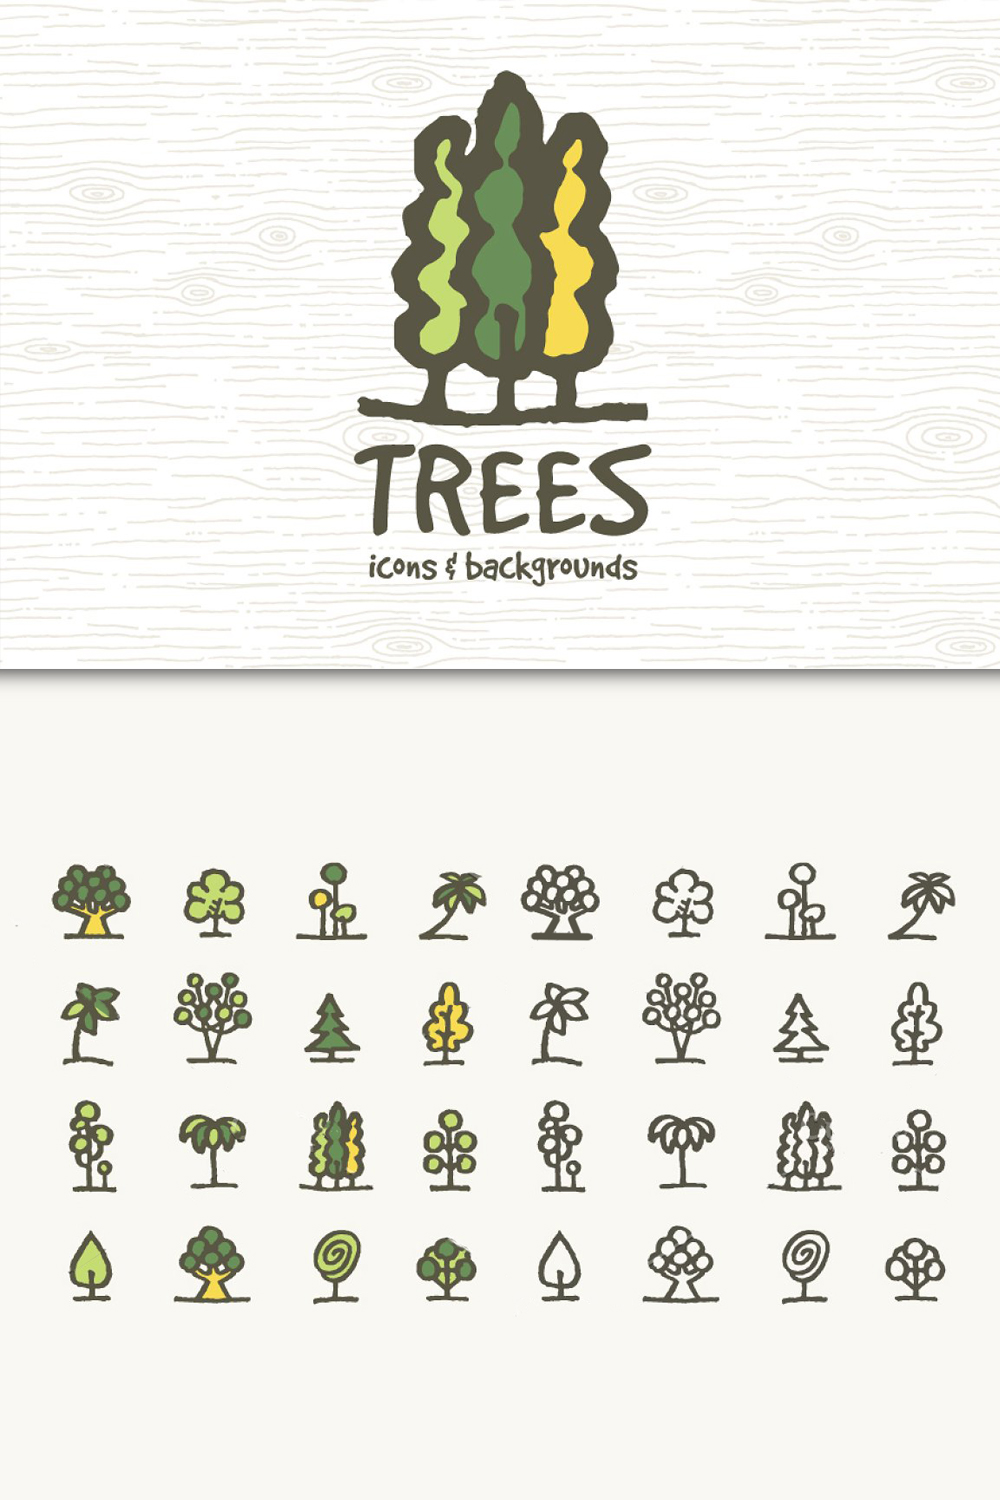 A large green logo in the form of three painted trees and 32 small trees.